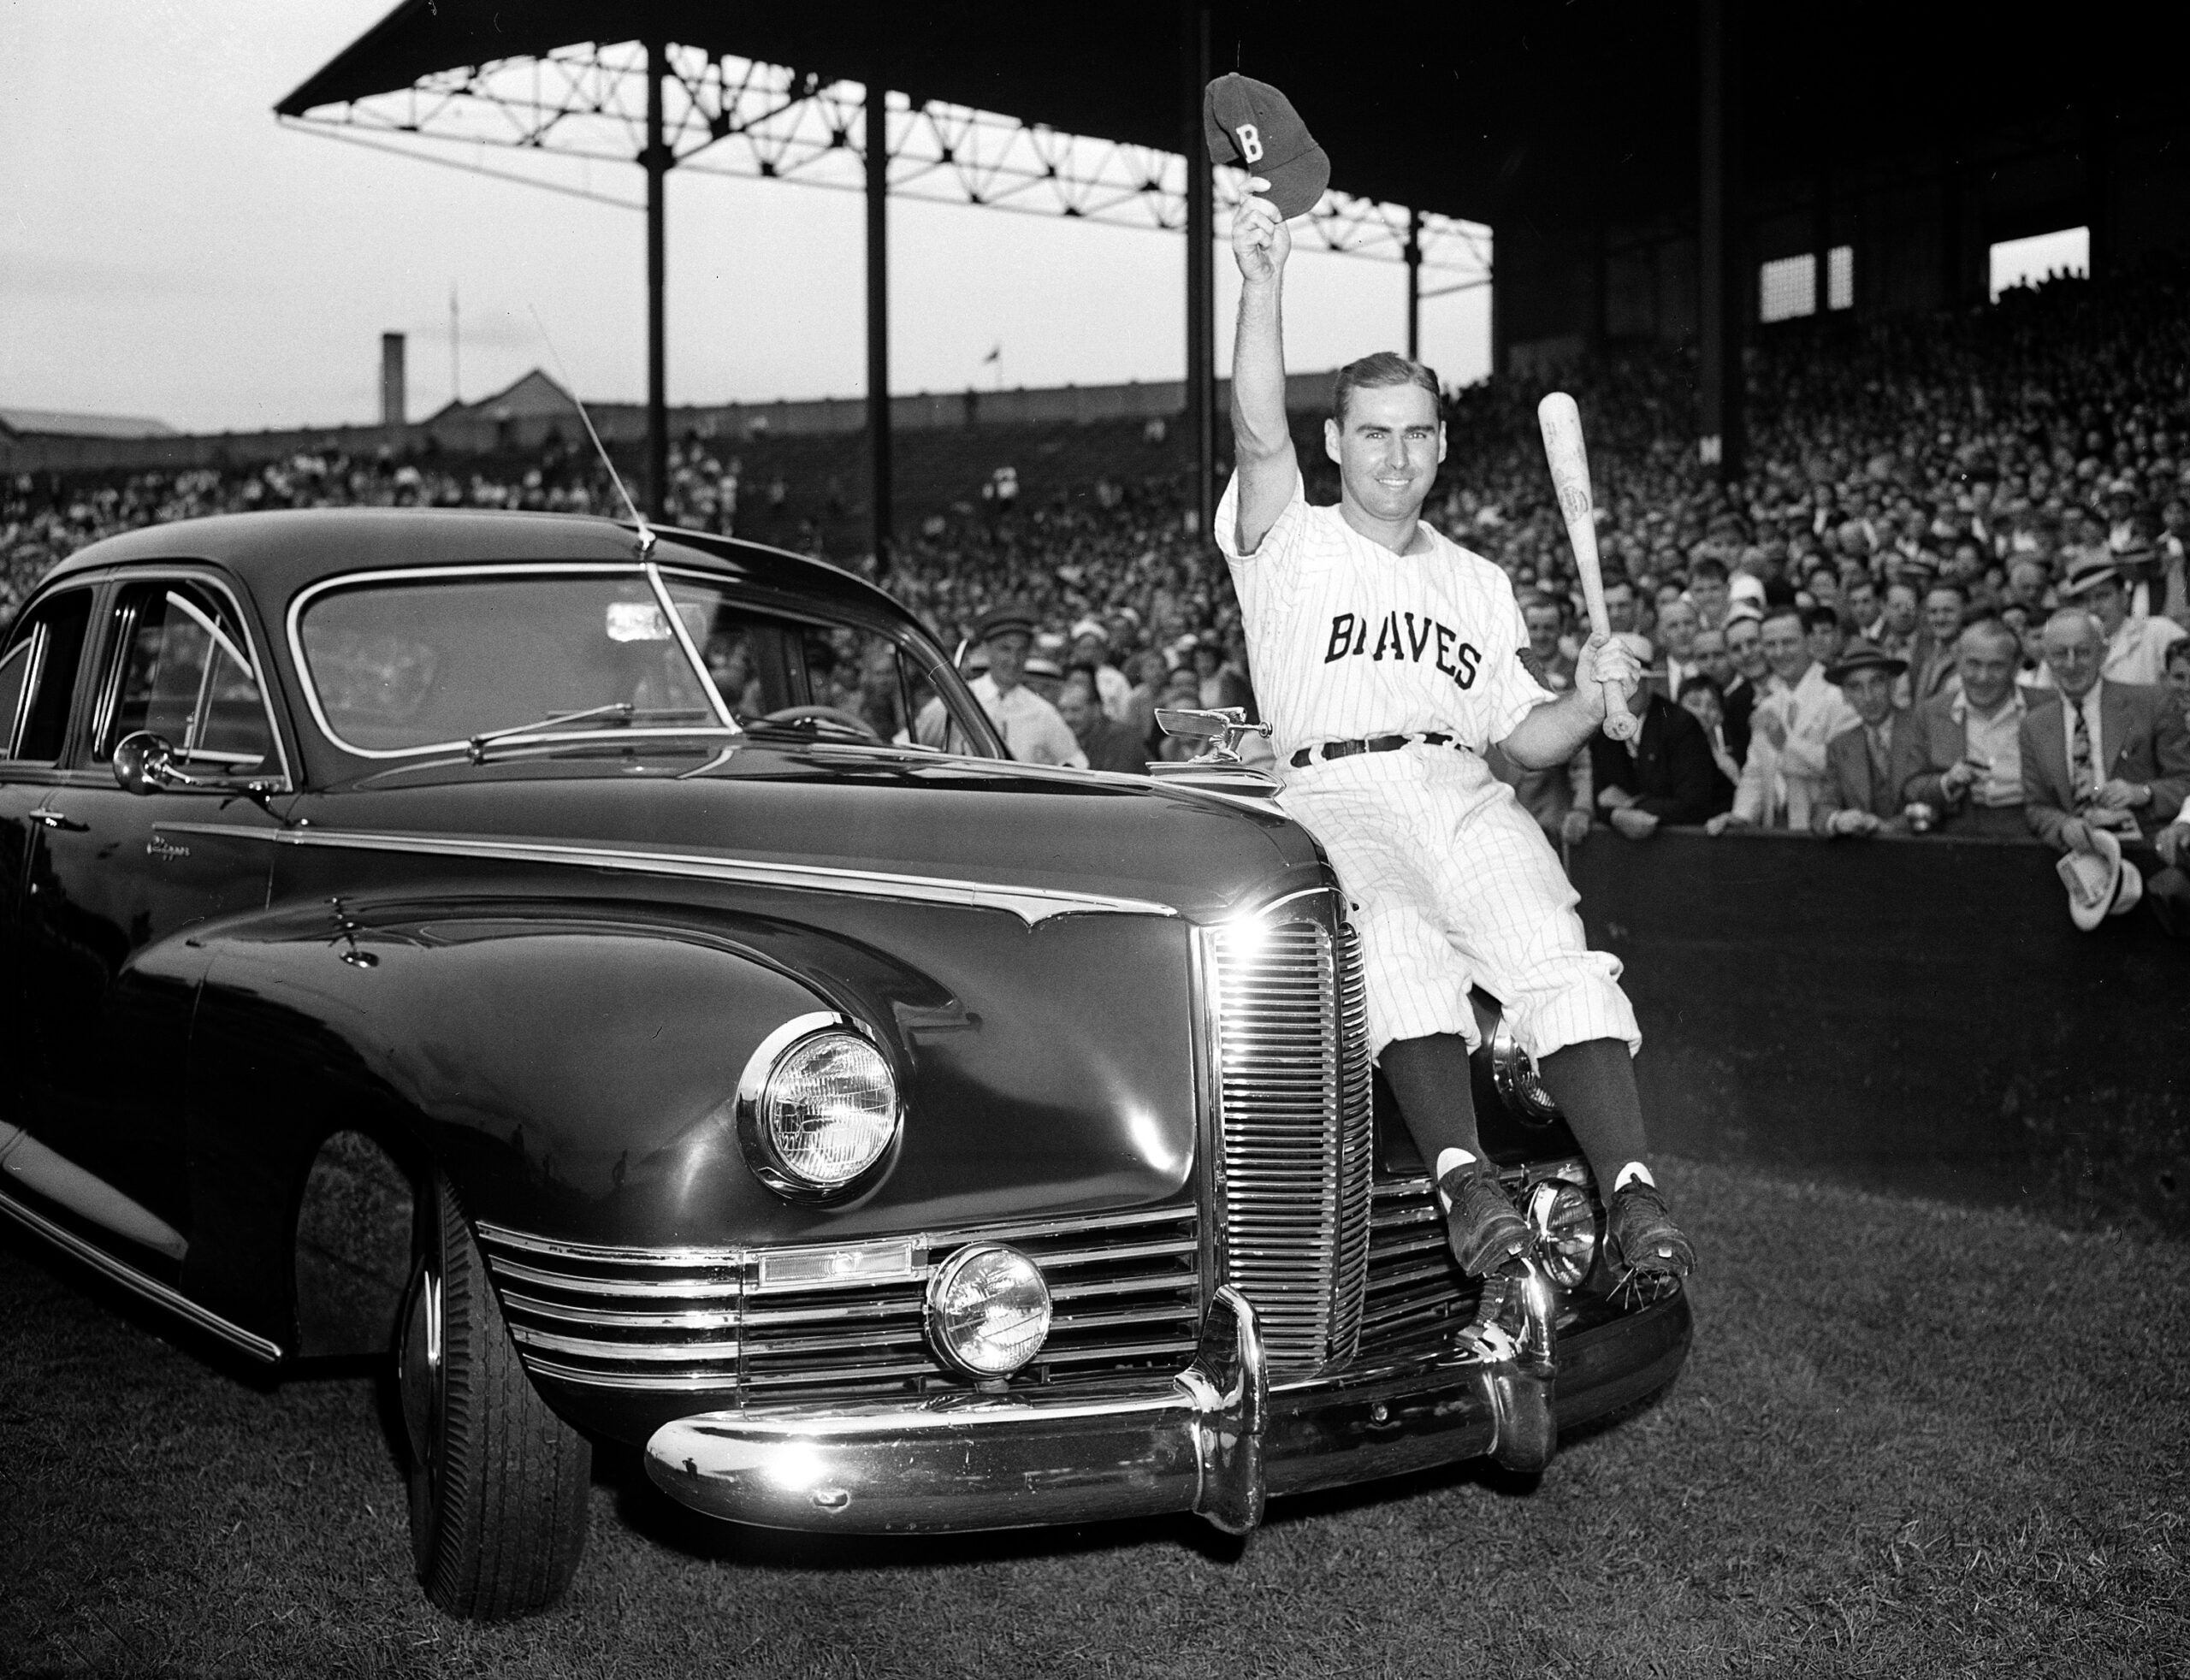 Boston Braves outfielder Tommy Holmes waves from the automobile presented to him on "Tommy Holmes Day."